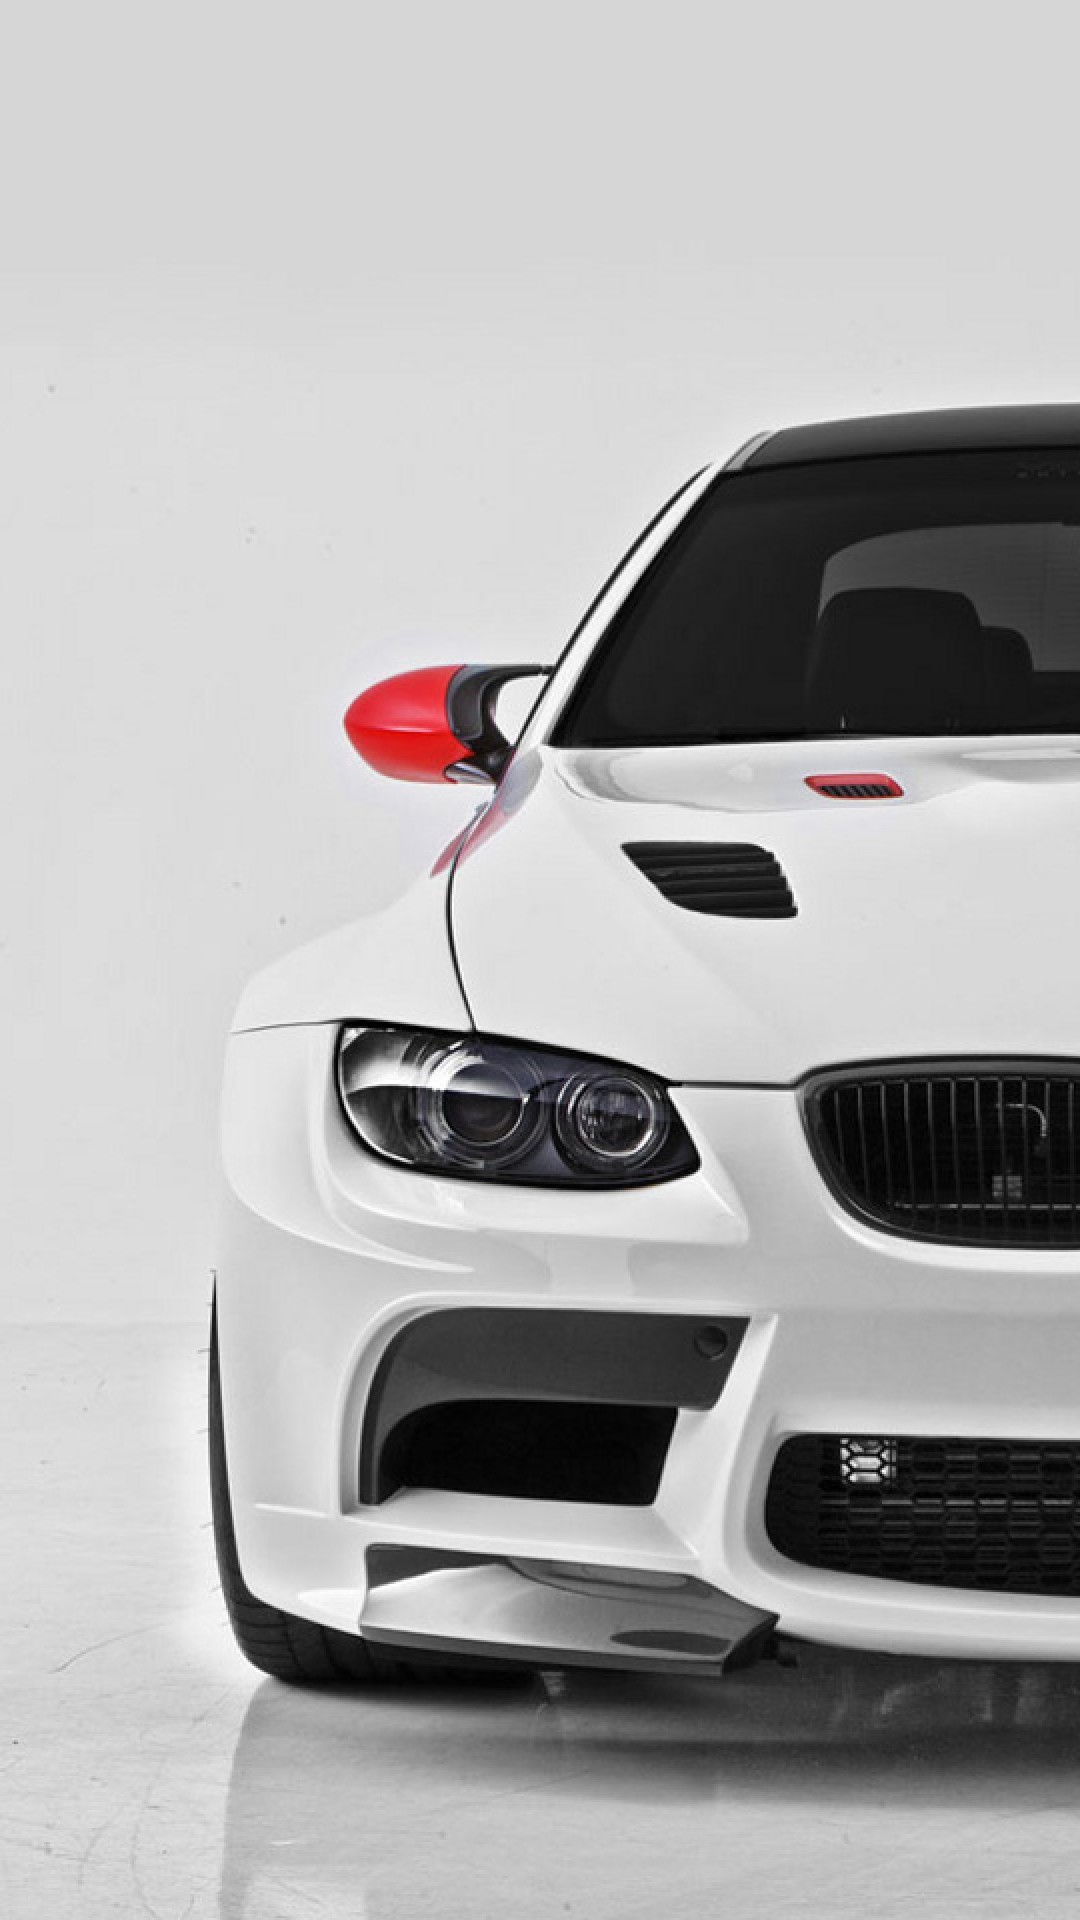 1080x1920 BMW iphone backgrounds tumblr